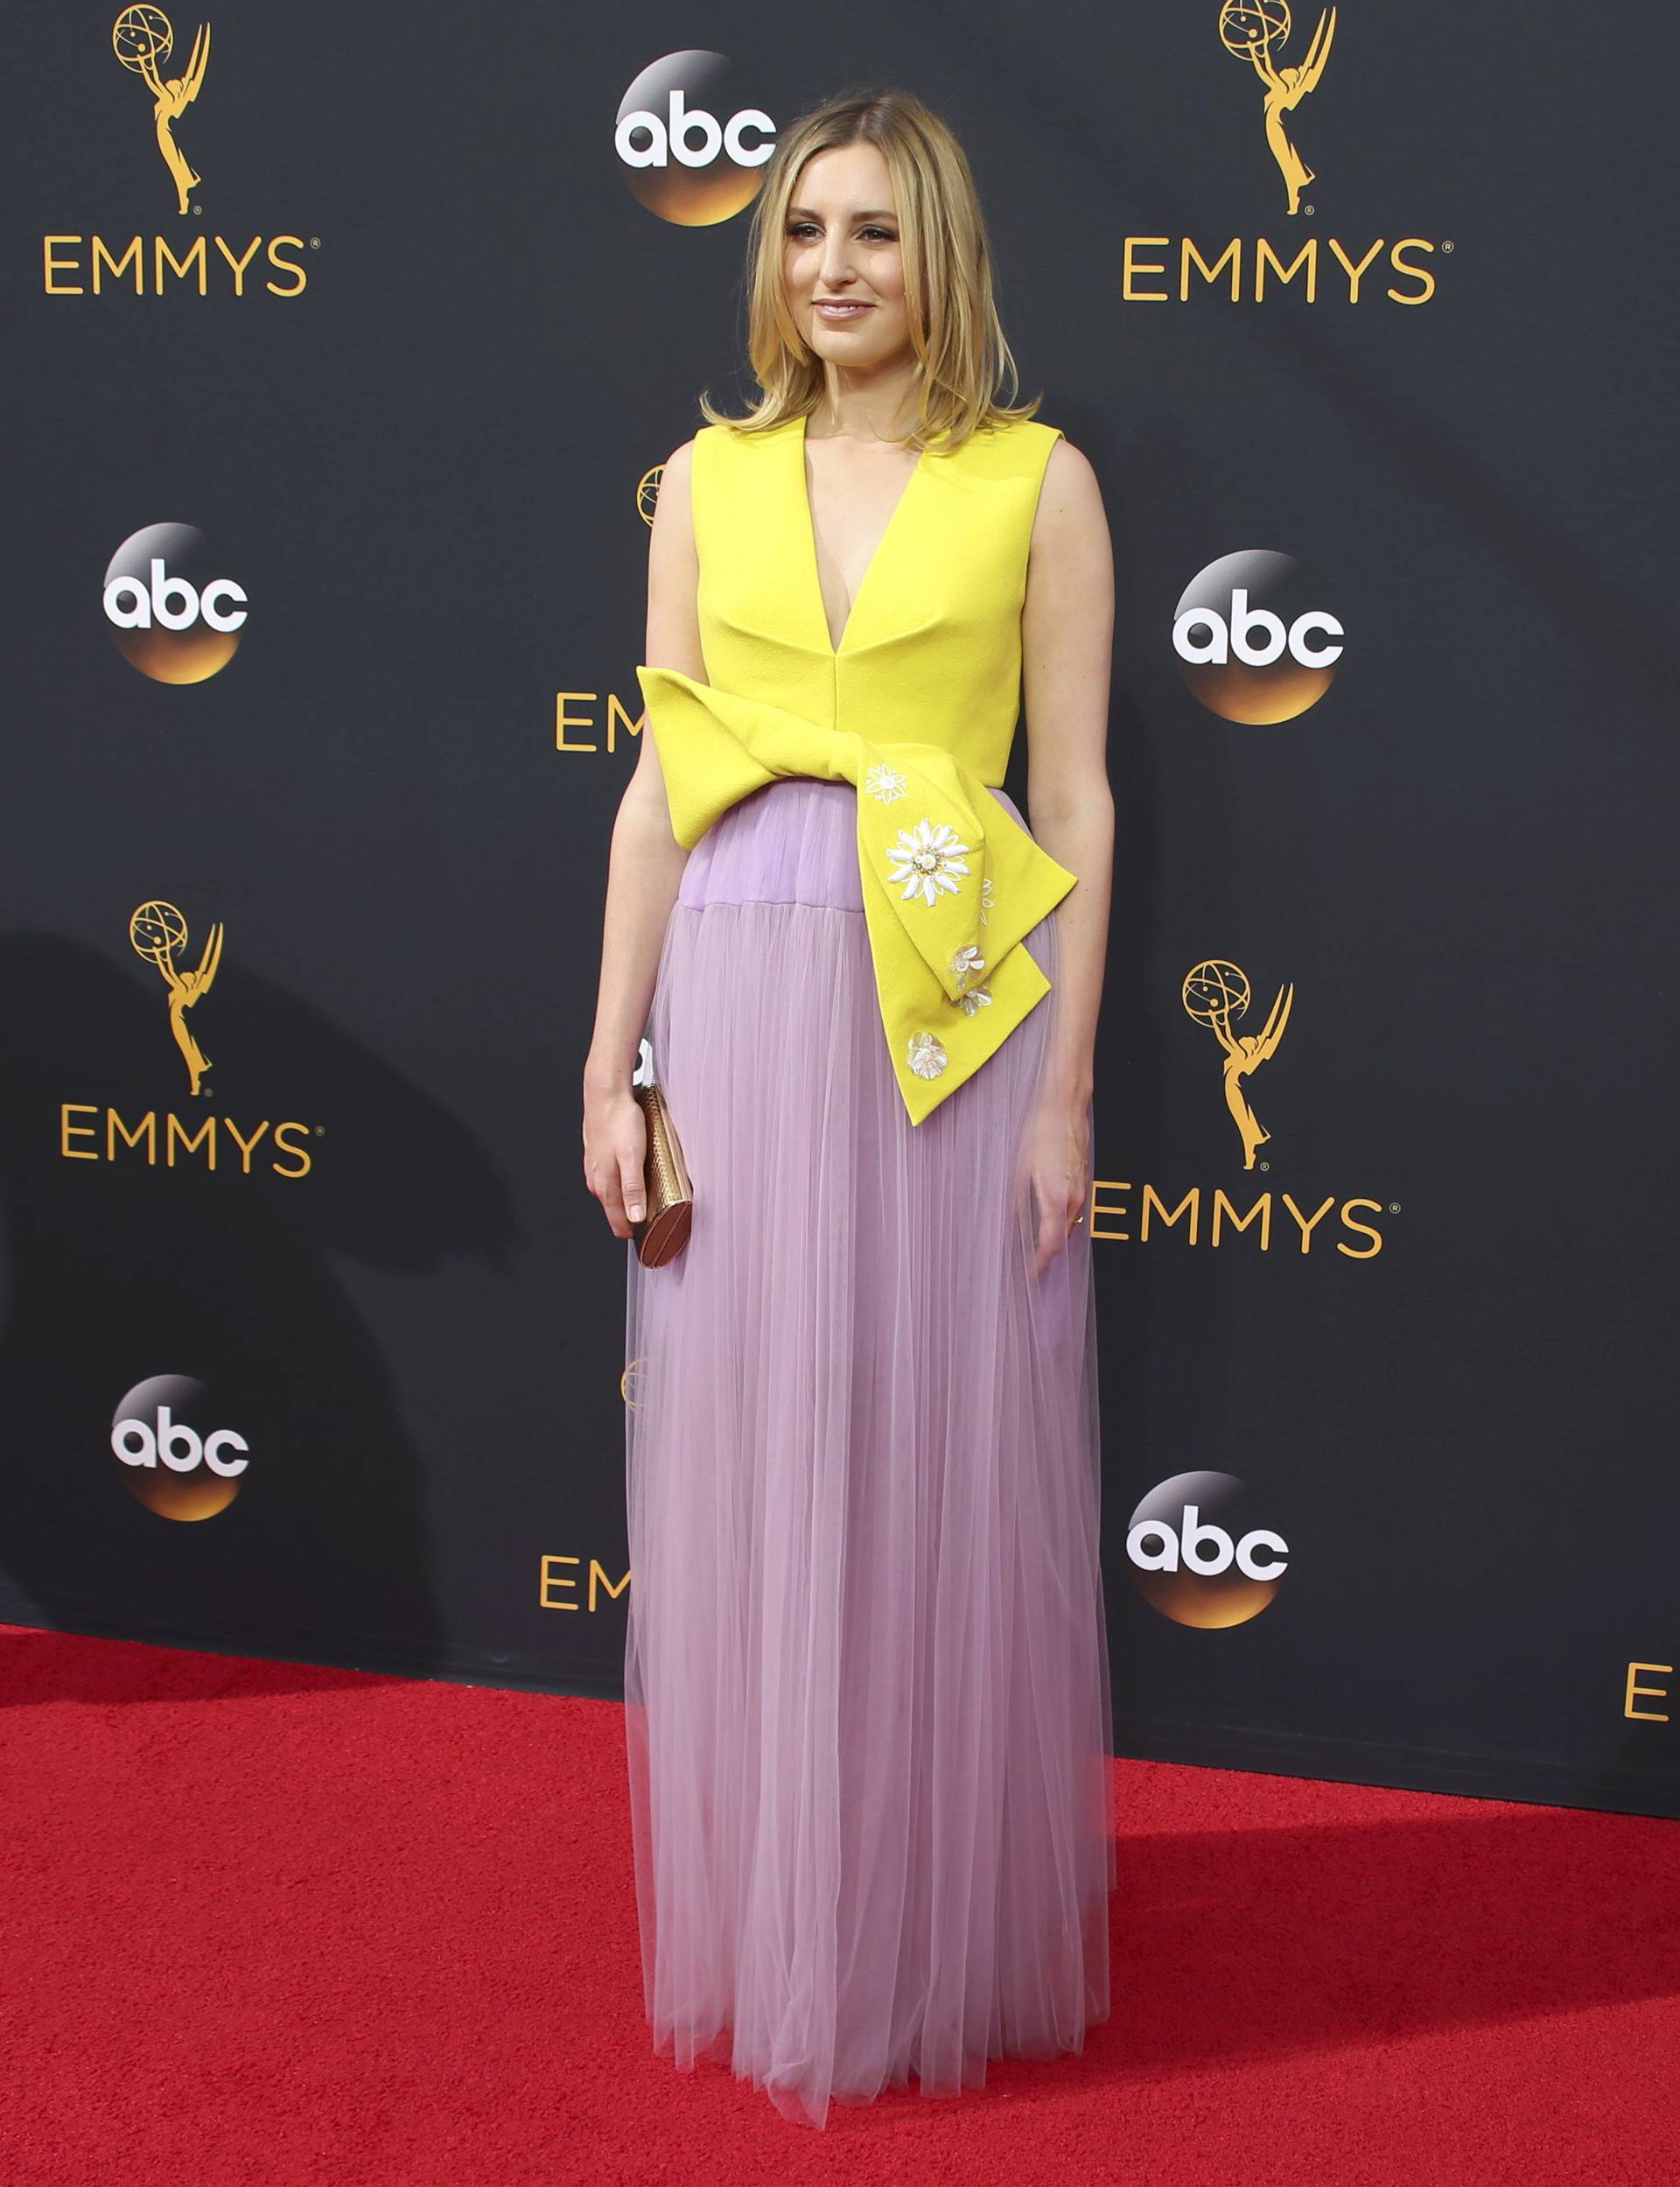 British actress Laura Carmichael arrives at the 68th Primetime Emmy Awards in Los Angeles